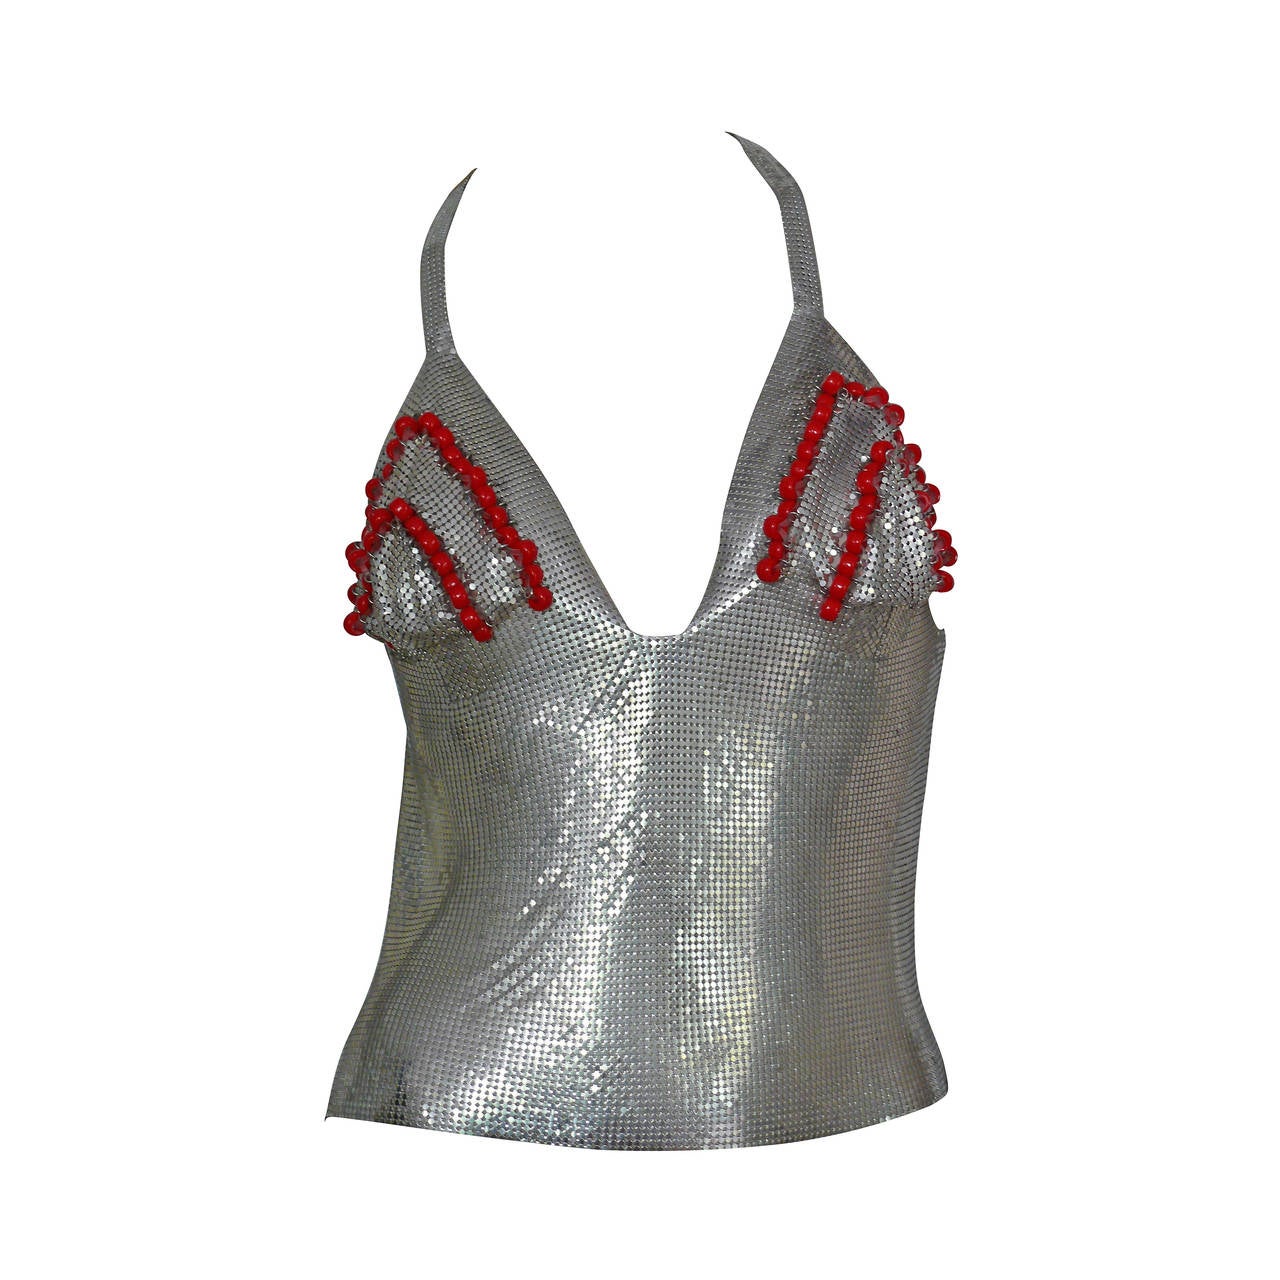 Paco Rabanne Chainmail Halter Top with Resin Bead Chevron Breast Detail For Sale